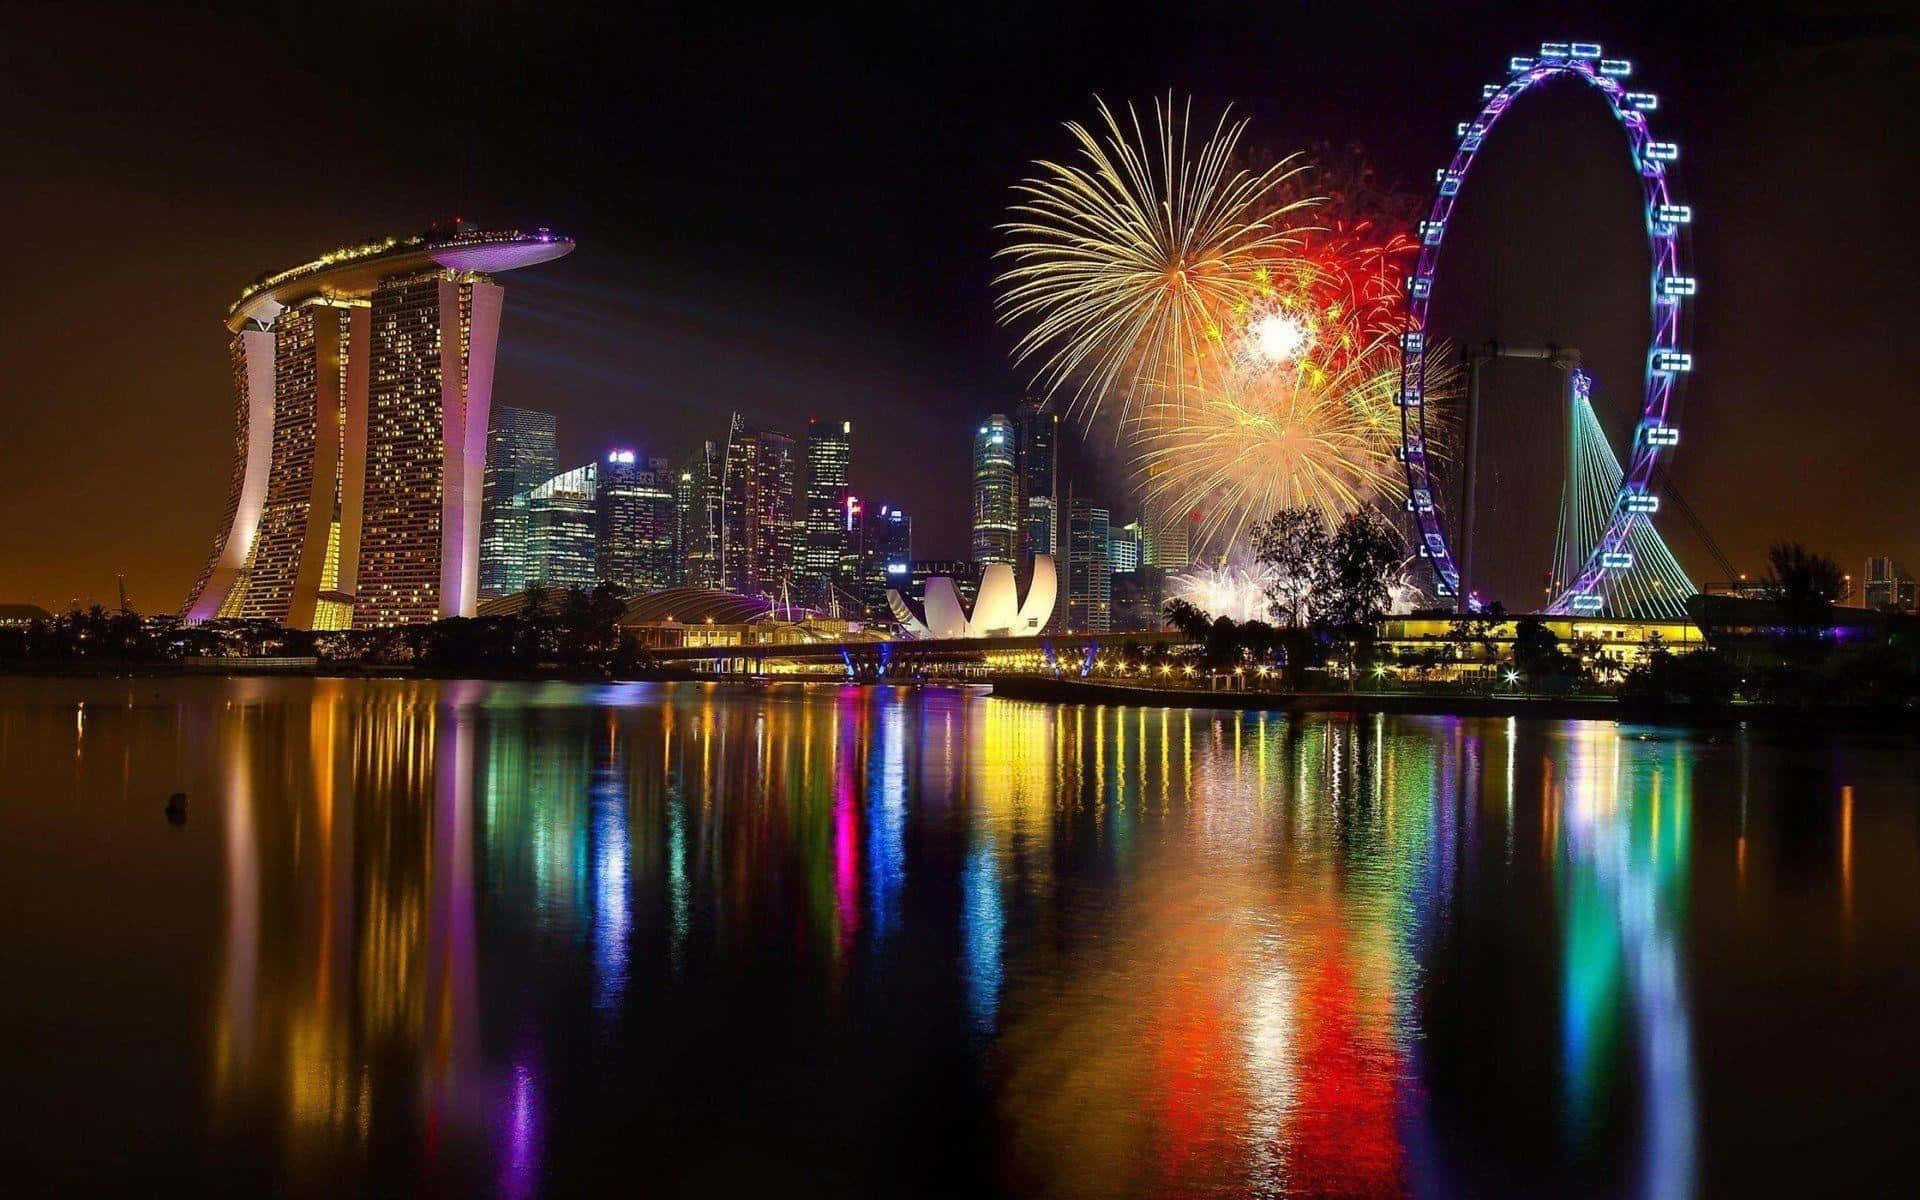 Singapore's New Year Fireworks Over The Marina Bay